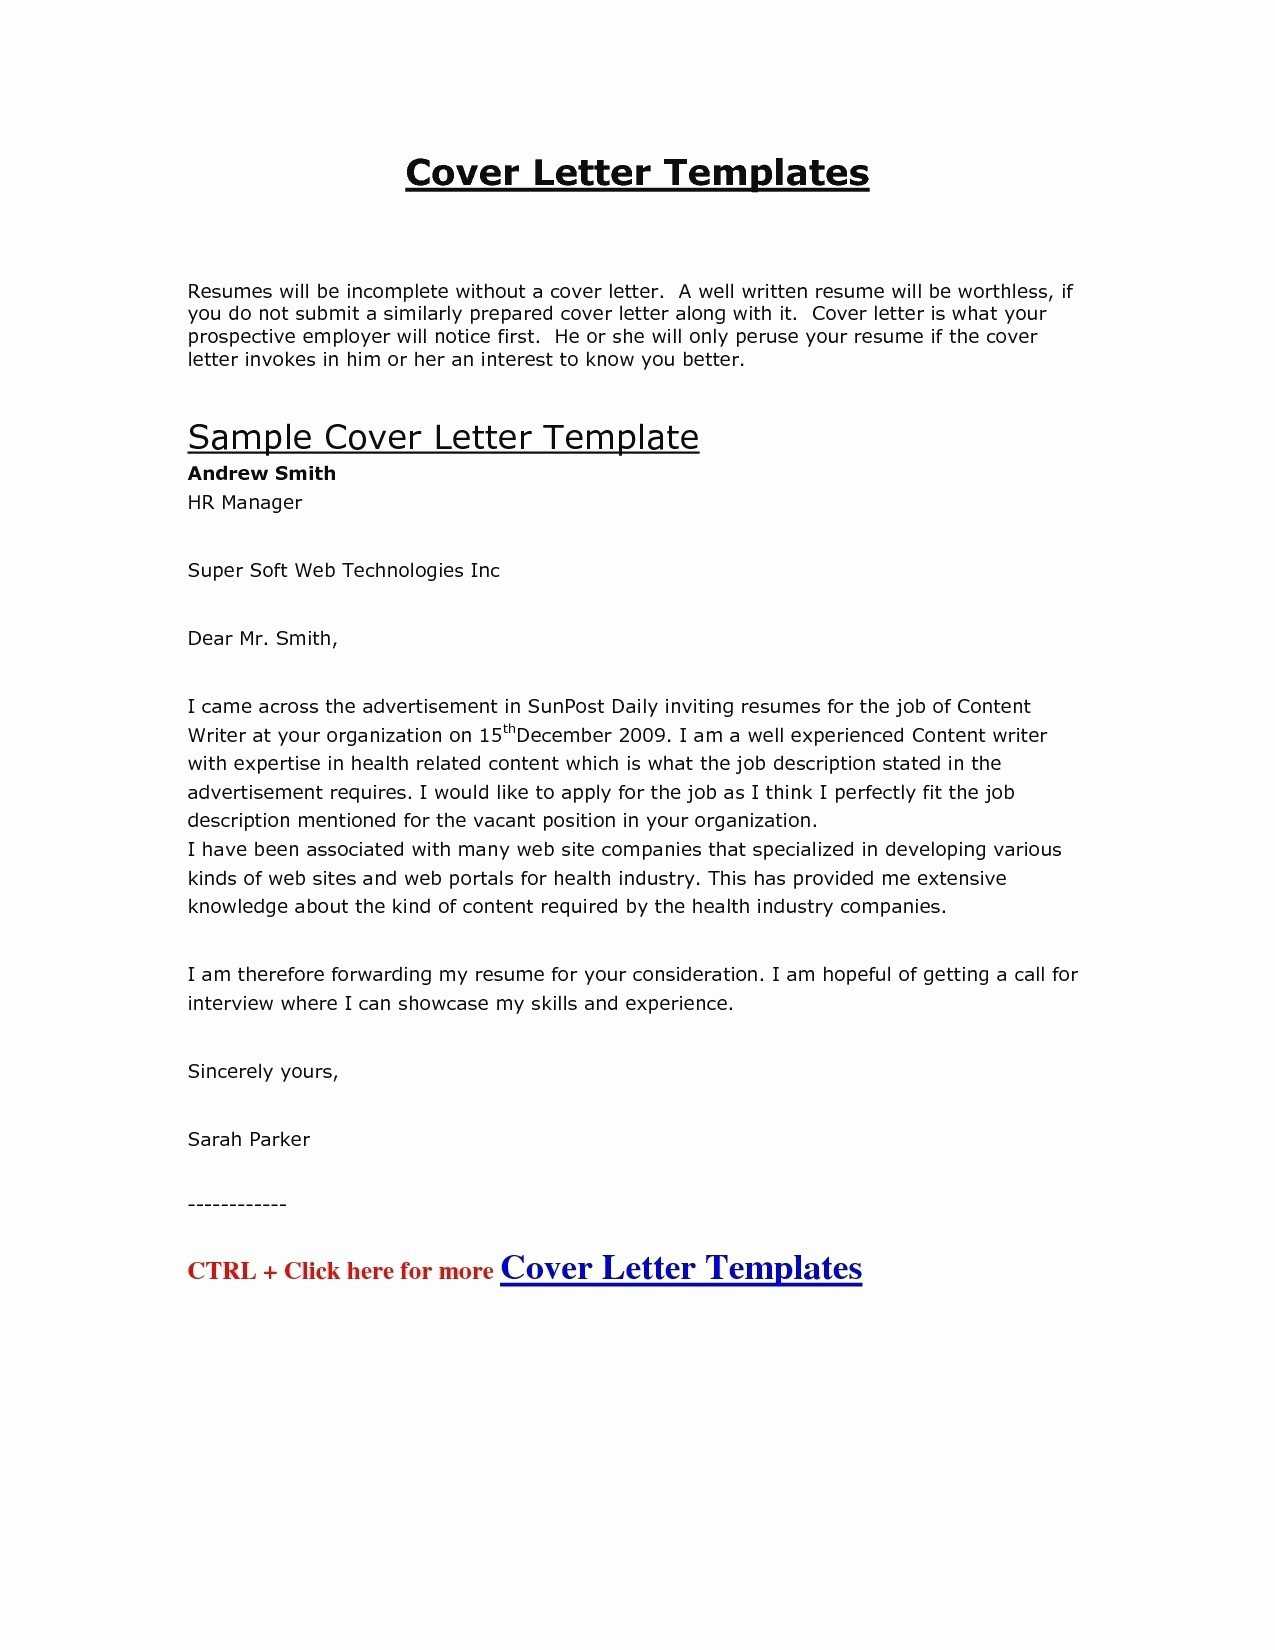 summary annual report cover letter sample